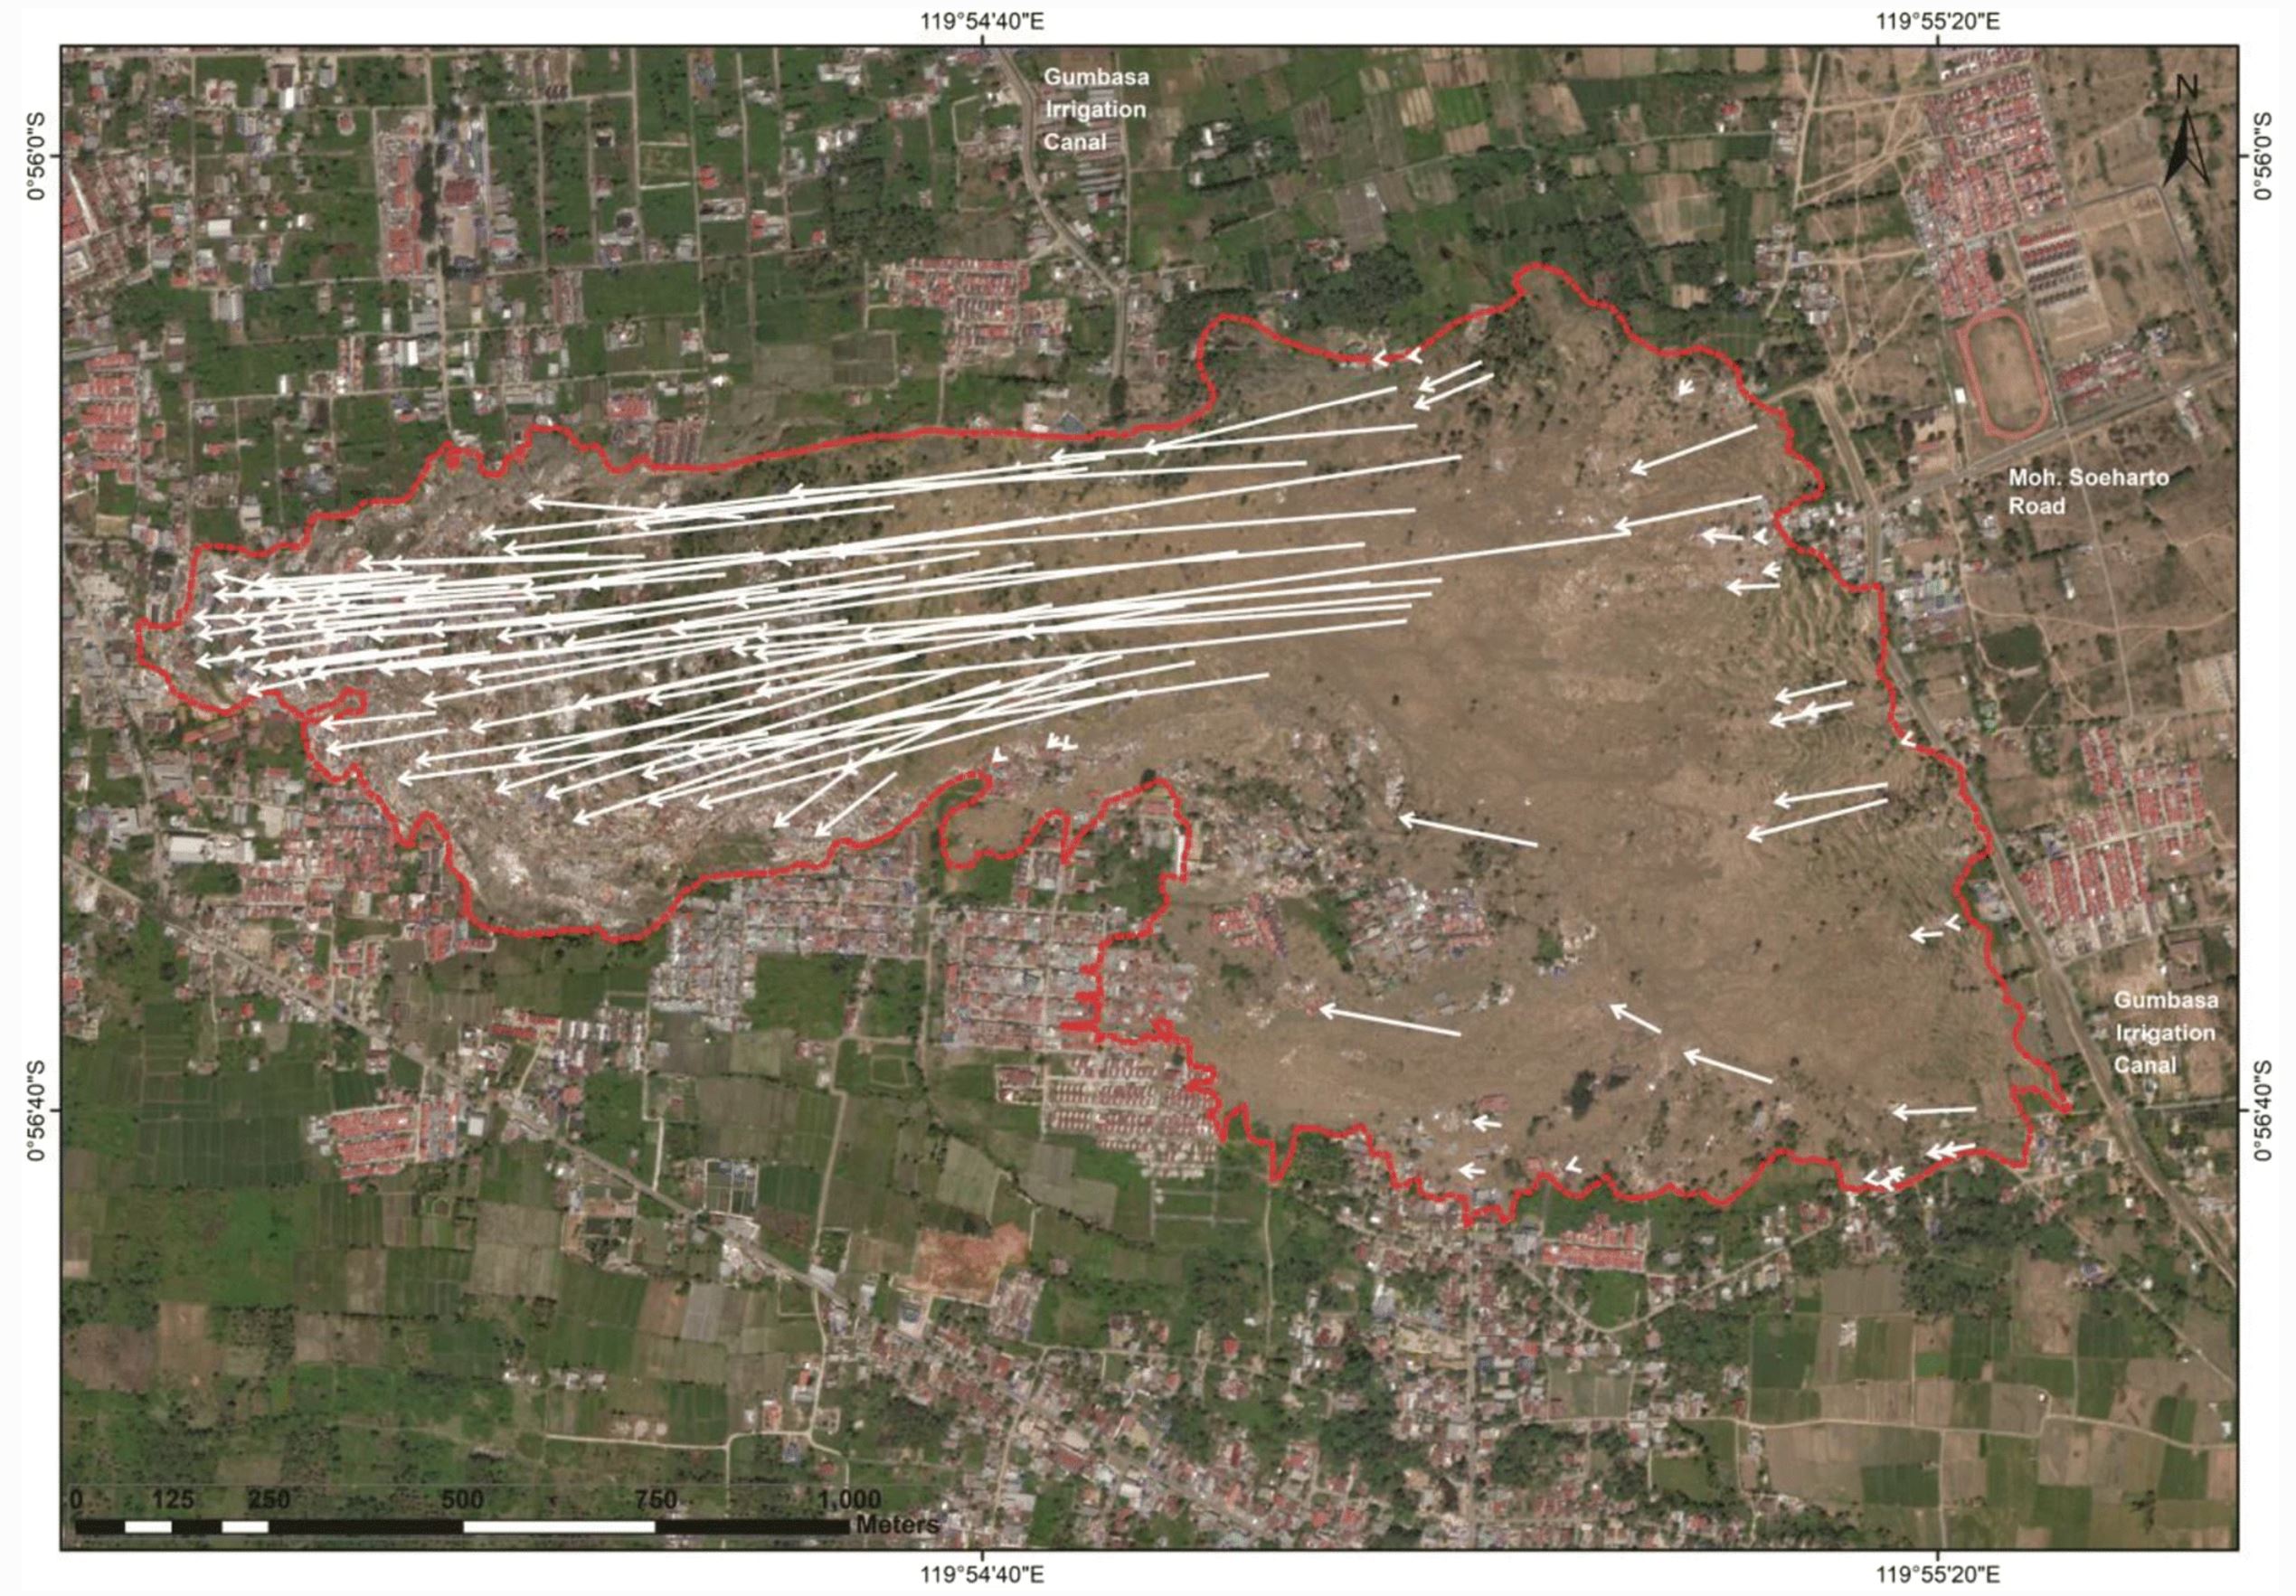 Movement vectors for the landslide at Petobo in Indonesia. 